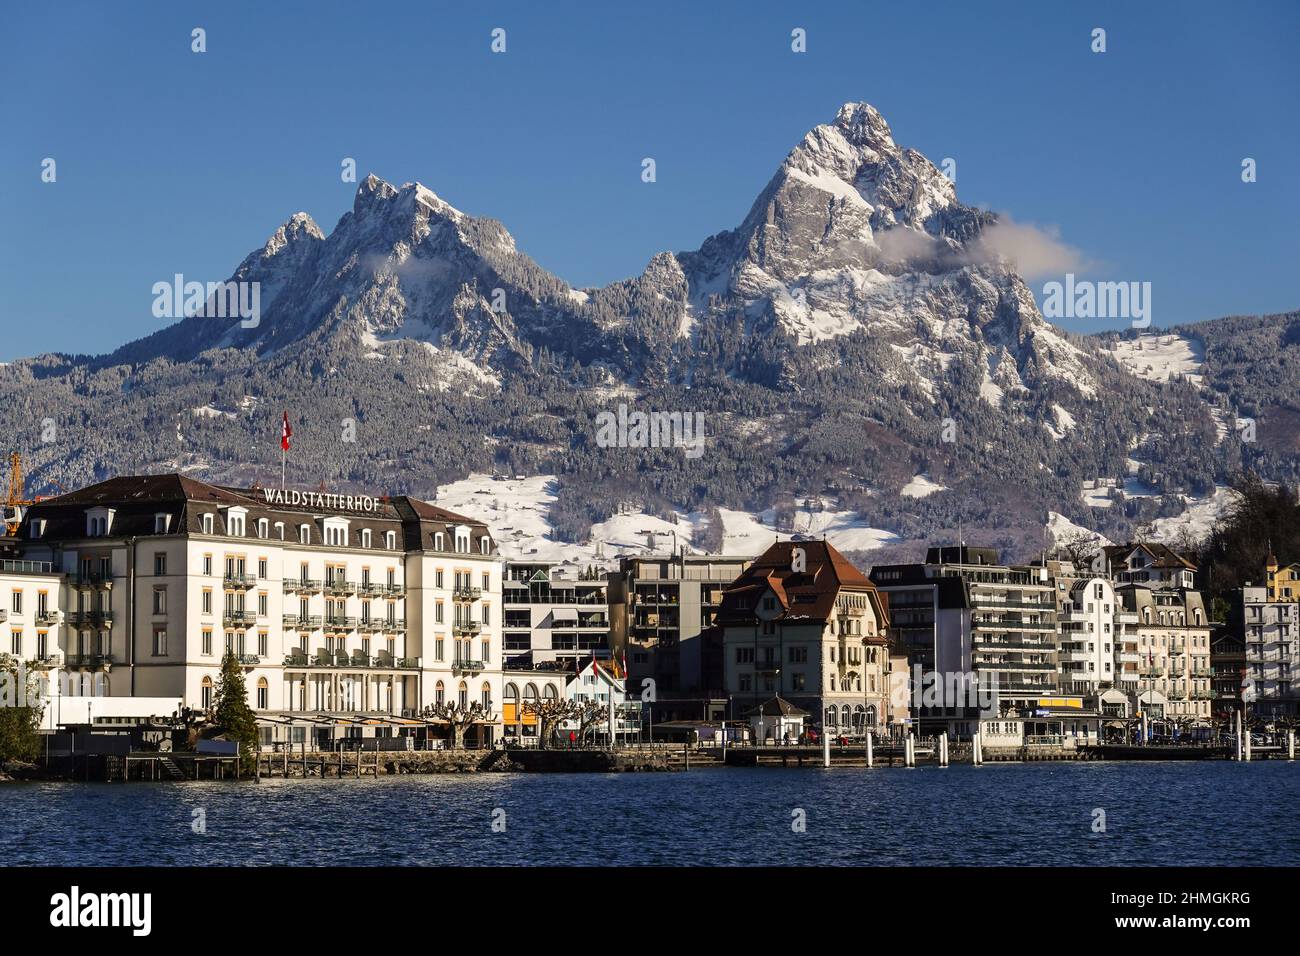 Brunnen, Switzerland - January 11 2022: Waterfront district of the Brunnen town in Canton Schwytz that lies along lake Lucerne and below the dramatic Stock Photo